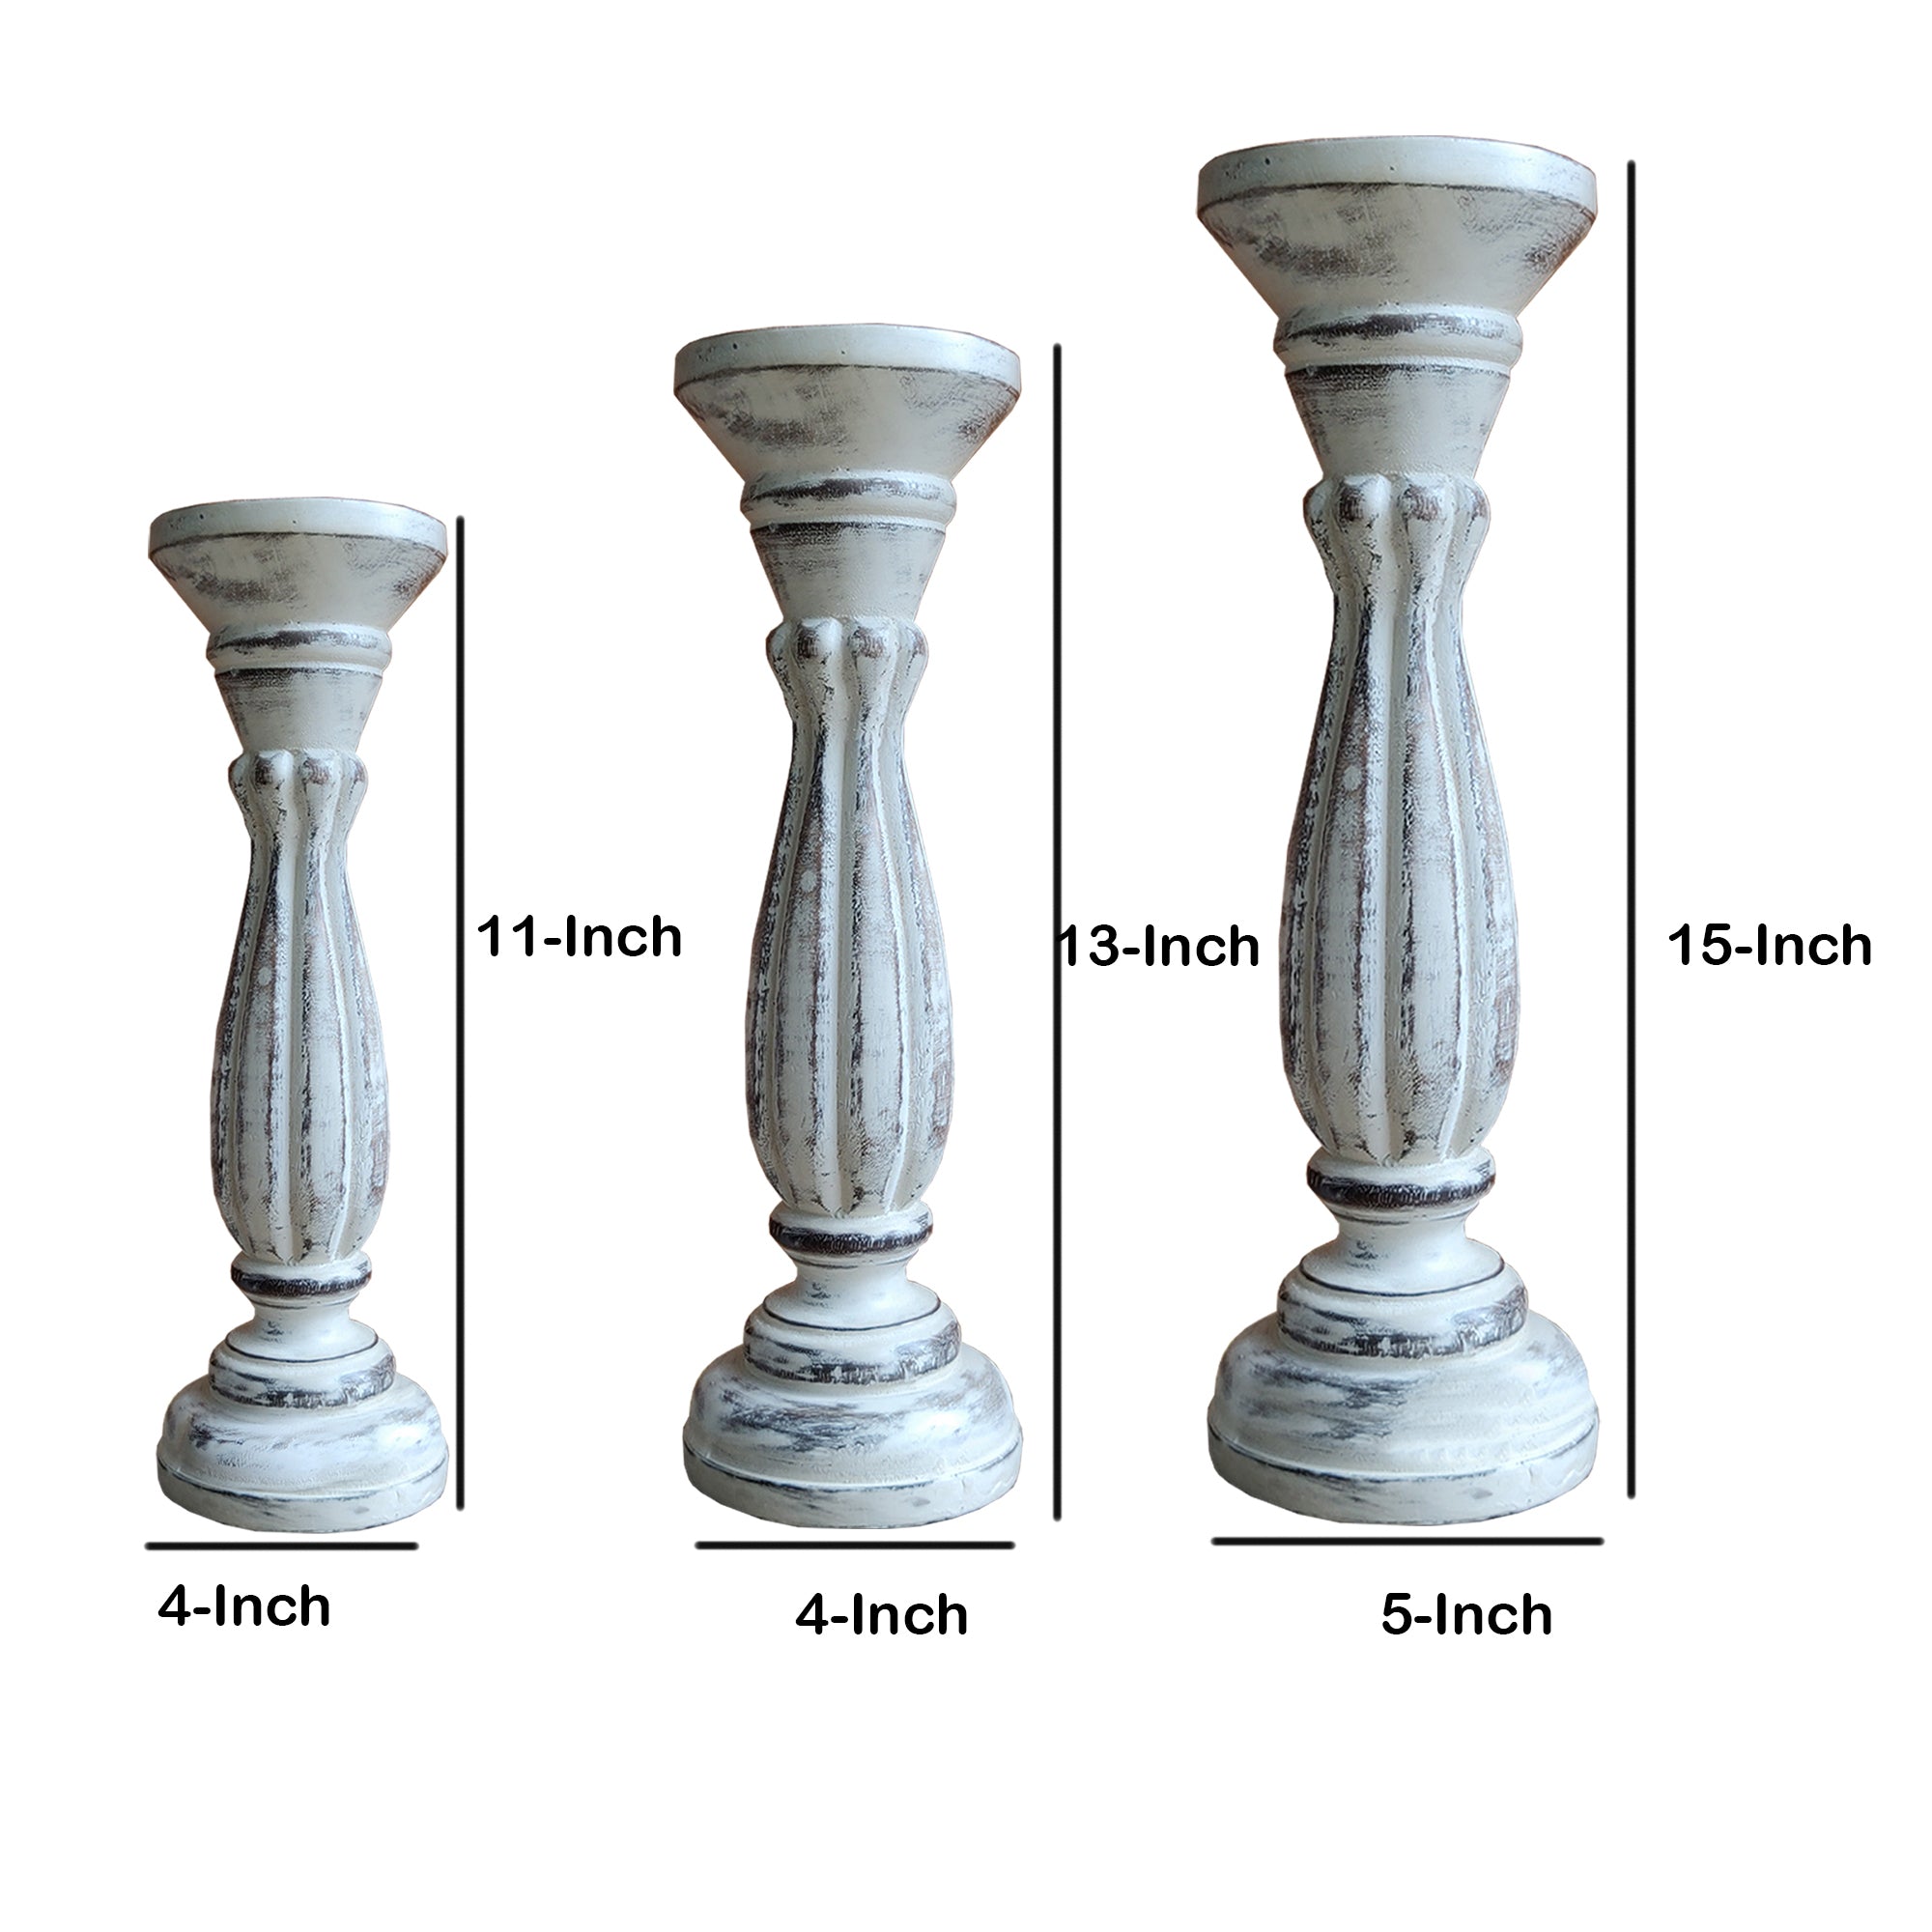 Handmade Wooden Candle Holder with Pillar Base Support - Distressed White (Set of 3)